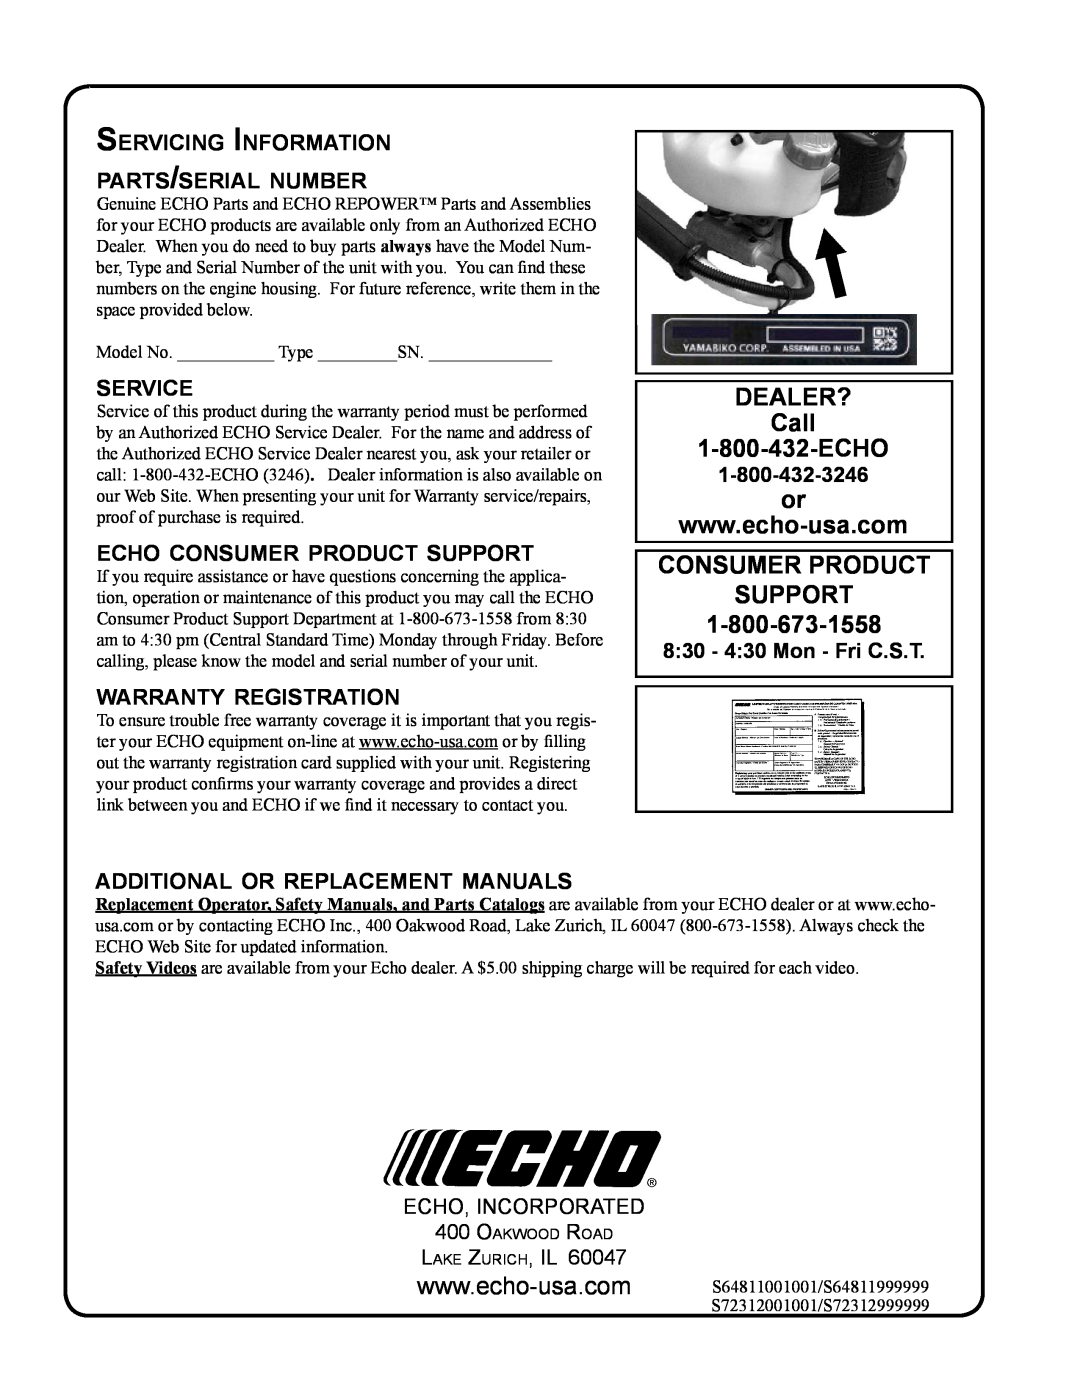 Echo HC-235 DEALER? Call 1-800-432-ECHO, Consumer Product Support, Servicing Information parts/serial number, service 